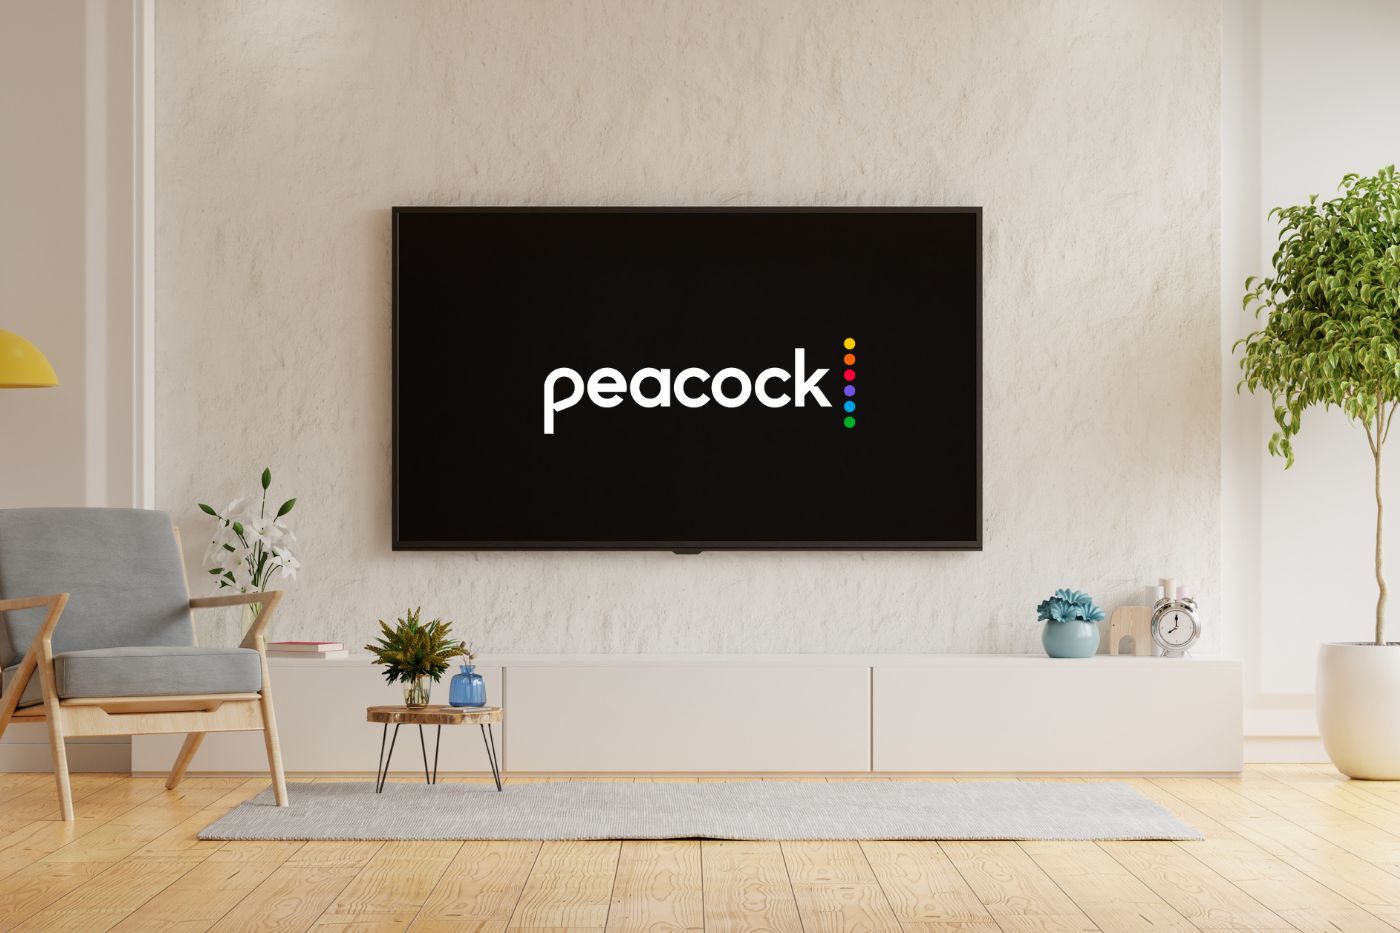 TV in The Living Room With Peacock Logo